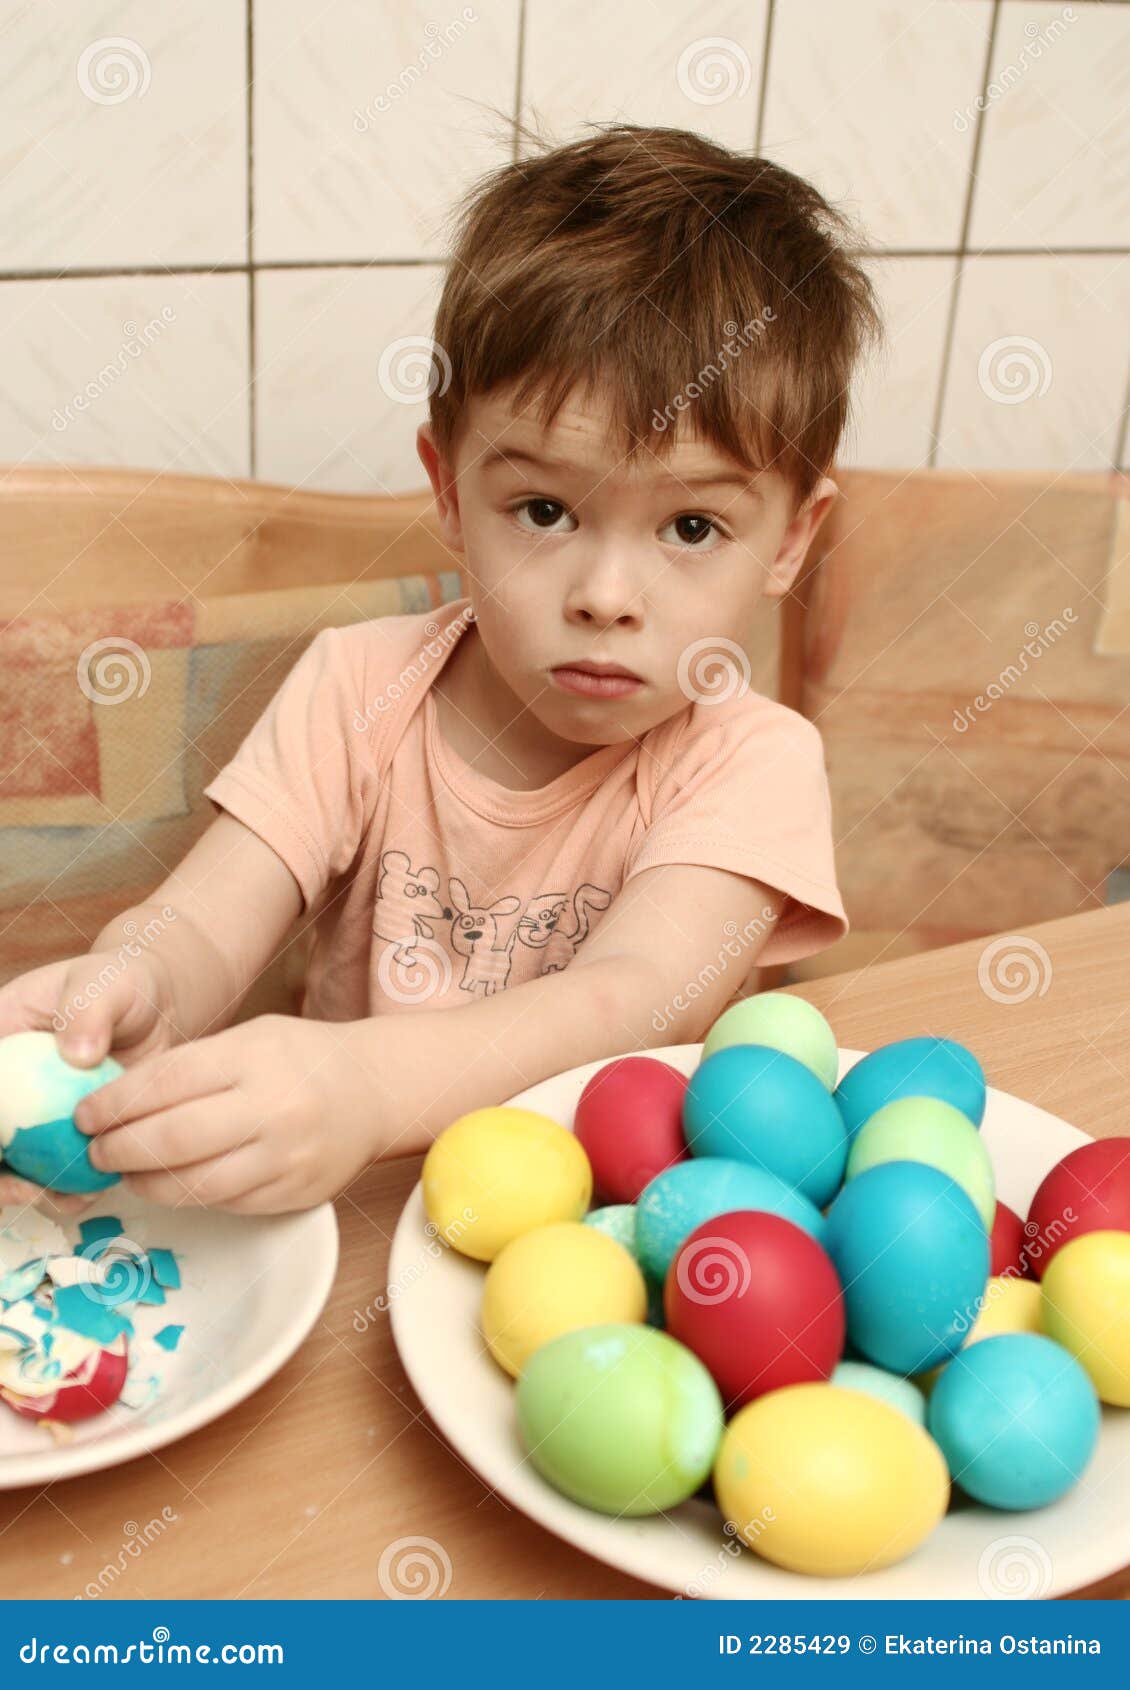 the boy cleans easter eggs